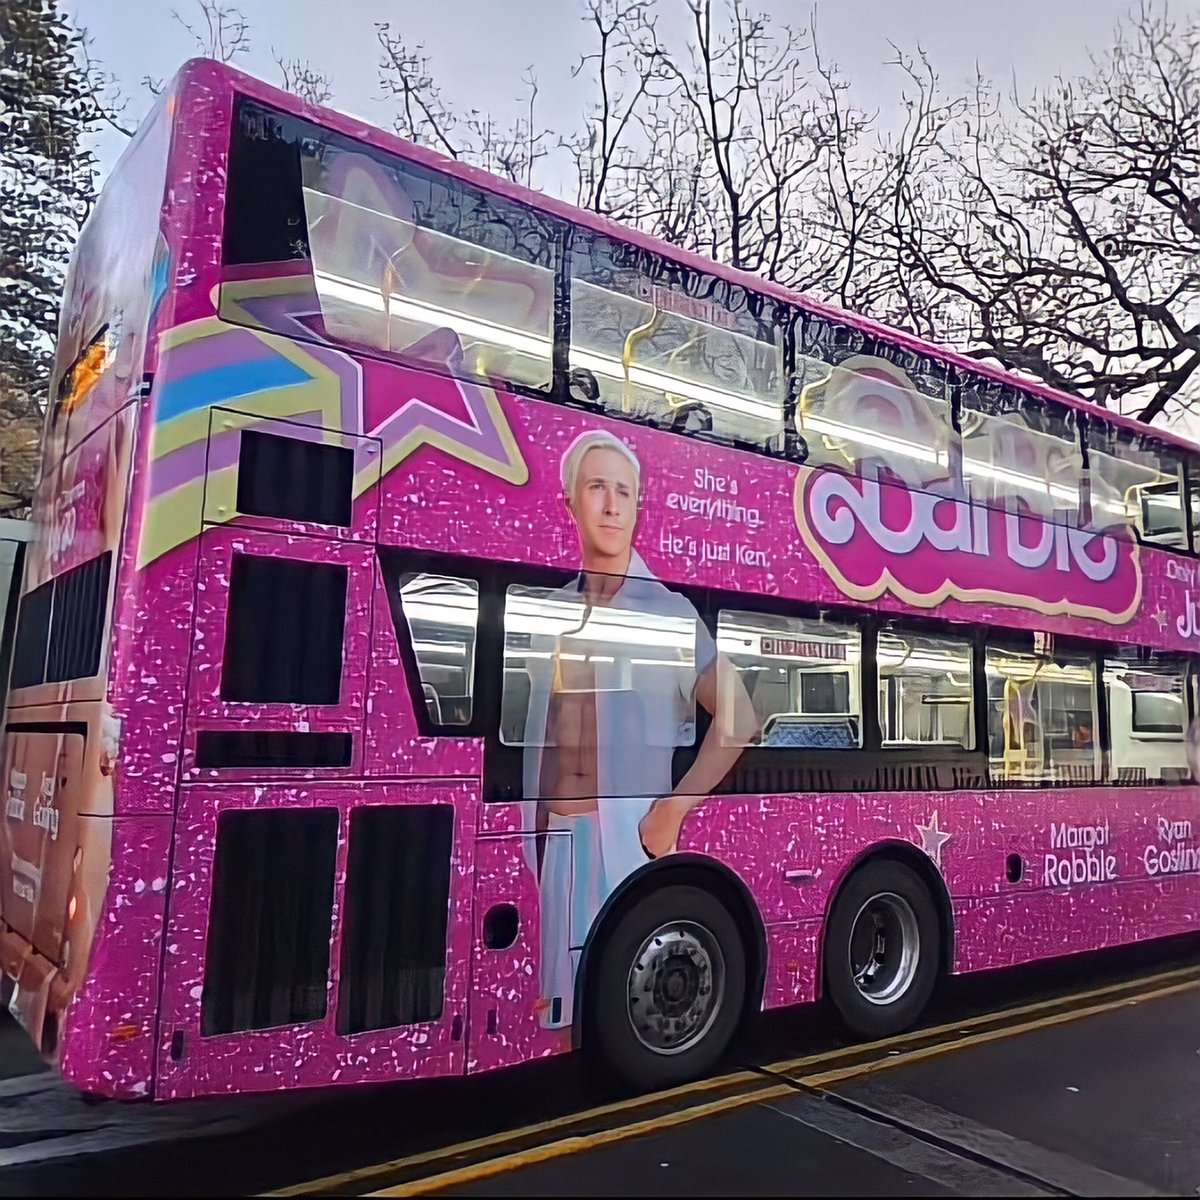 camilla rhodes on Twitter: "what if we KISSED and HELD HANDS inside the ryan gosling barbie bus / X